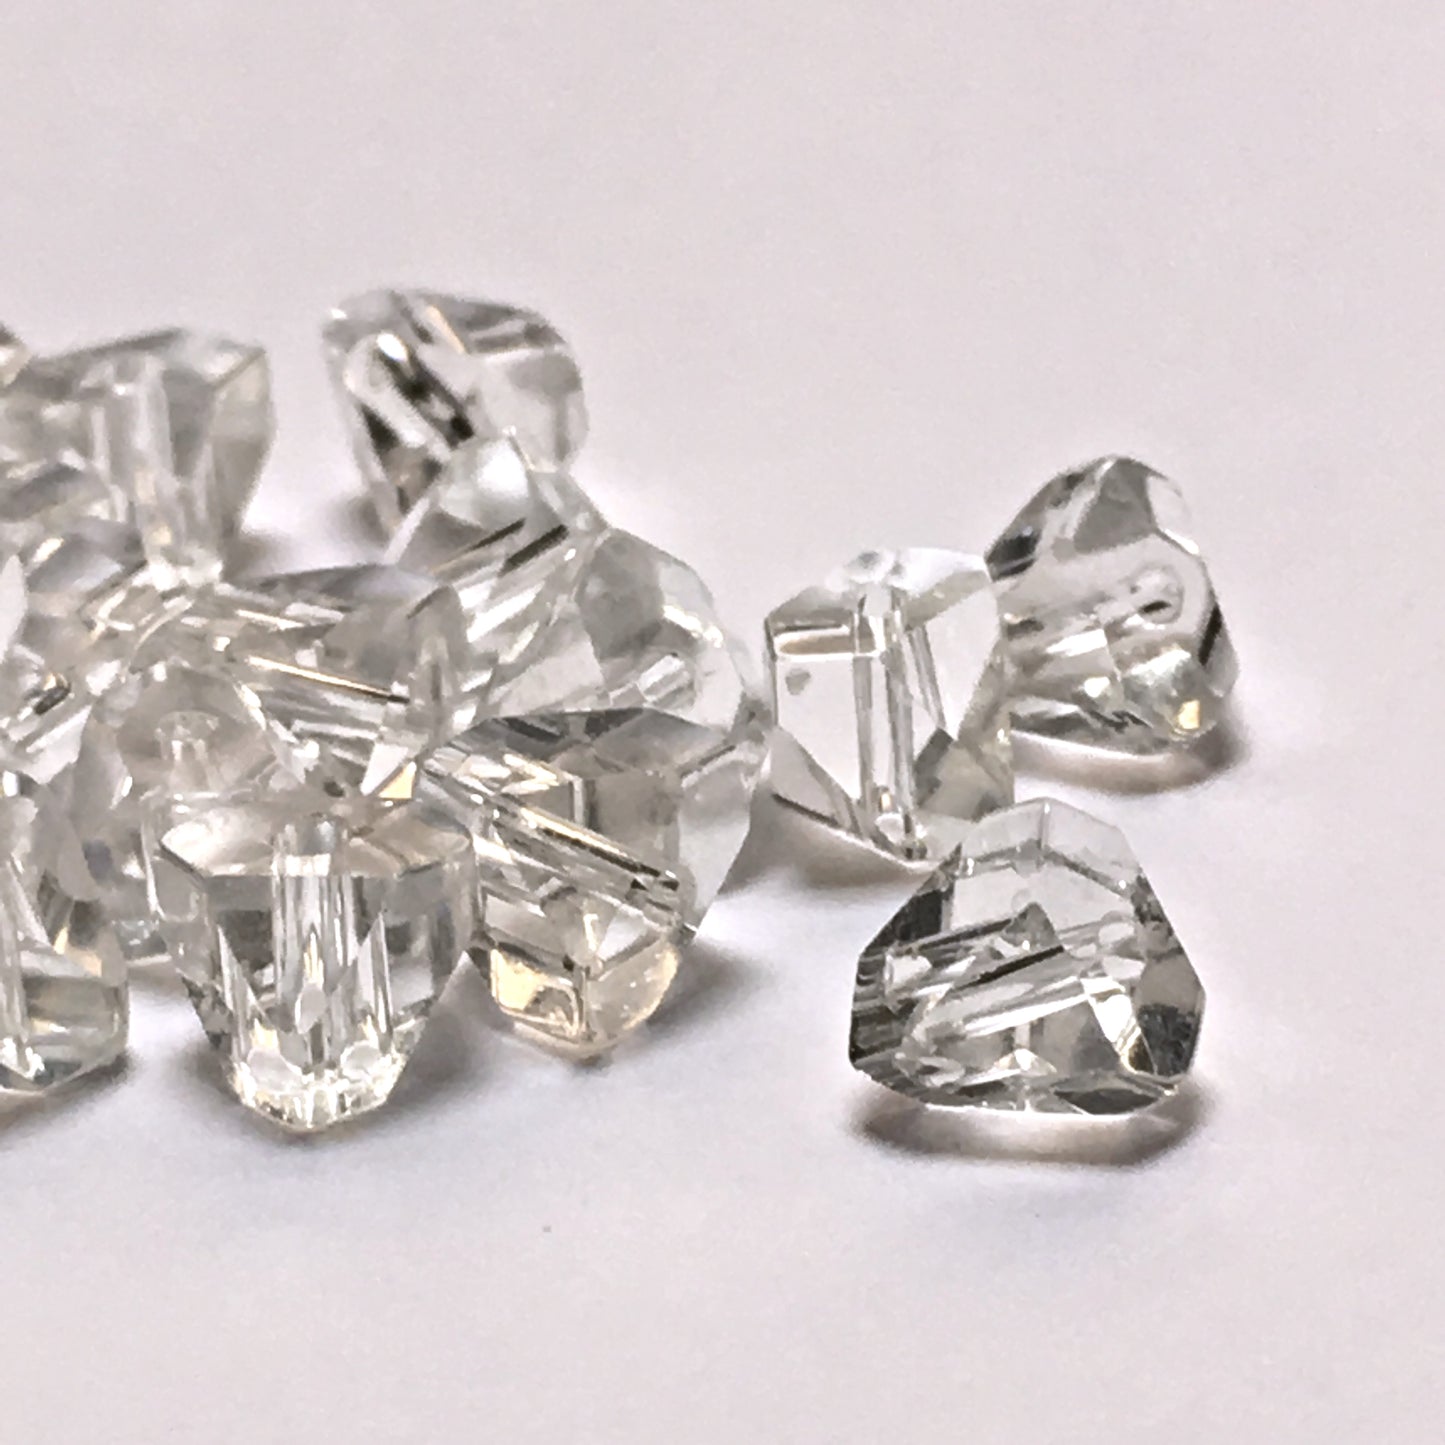 Clear Crystal Opposing Cornerless Cube Beads, 4 mm, 10 Beads